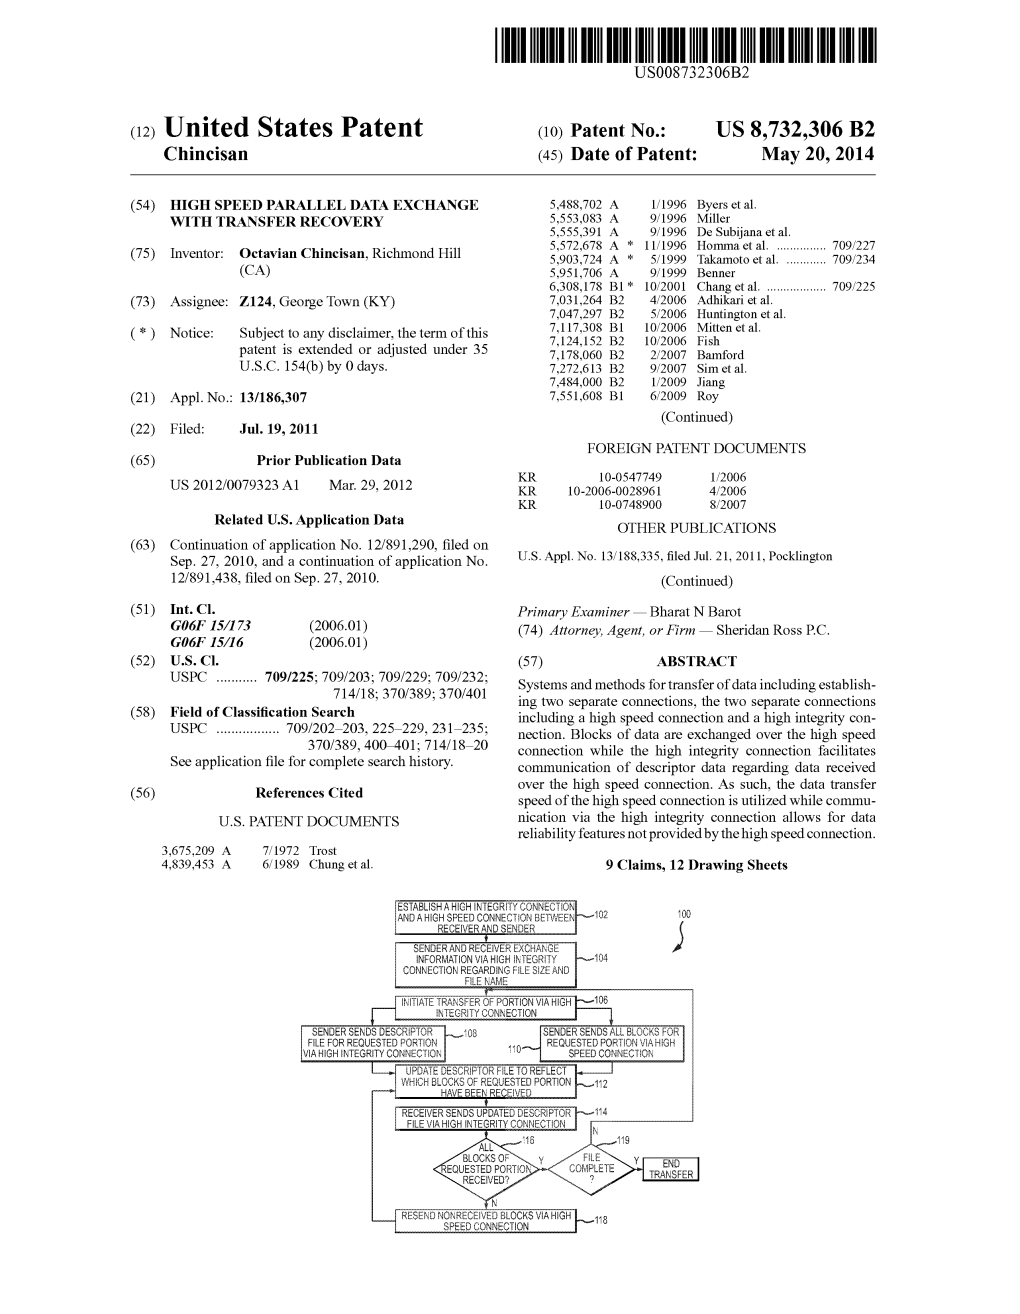 (12) United States Patent (10) Patent N0.: US 8,732,306 B2 Chincisan (45) Date of Patent: May 20, 2014